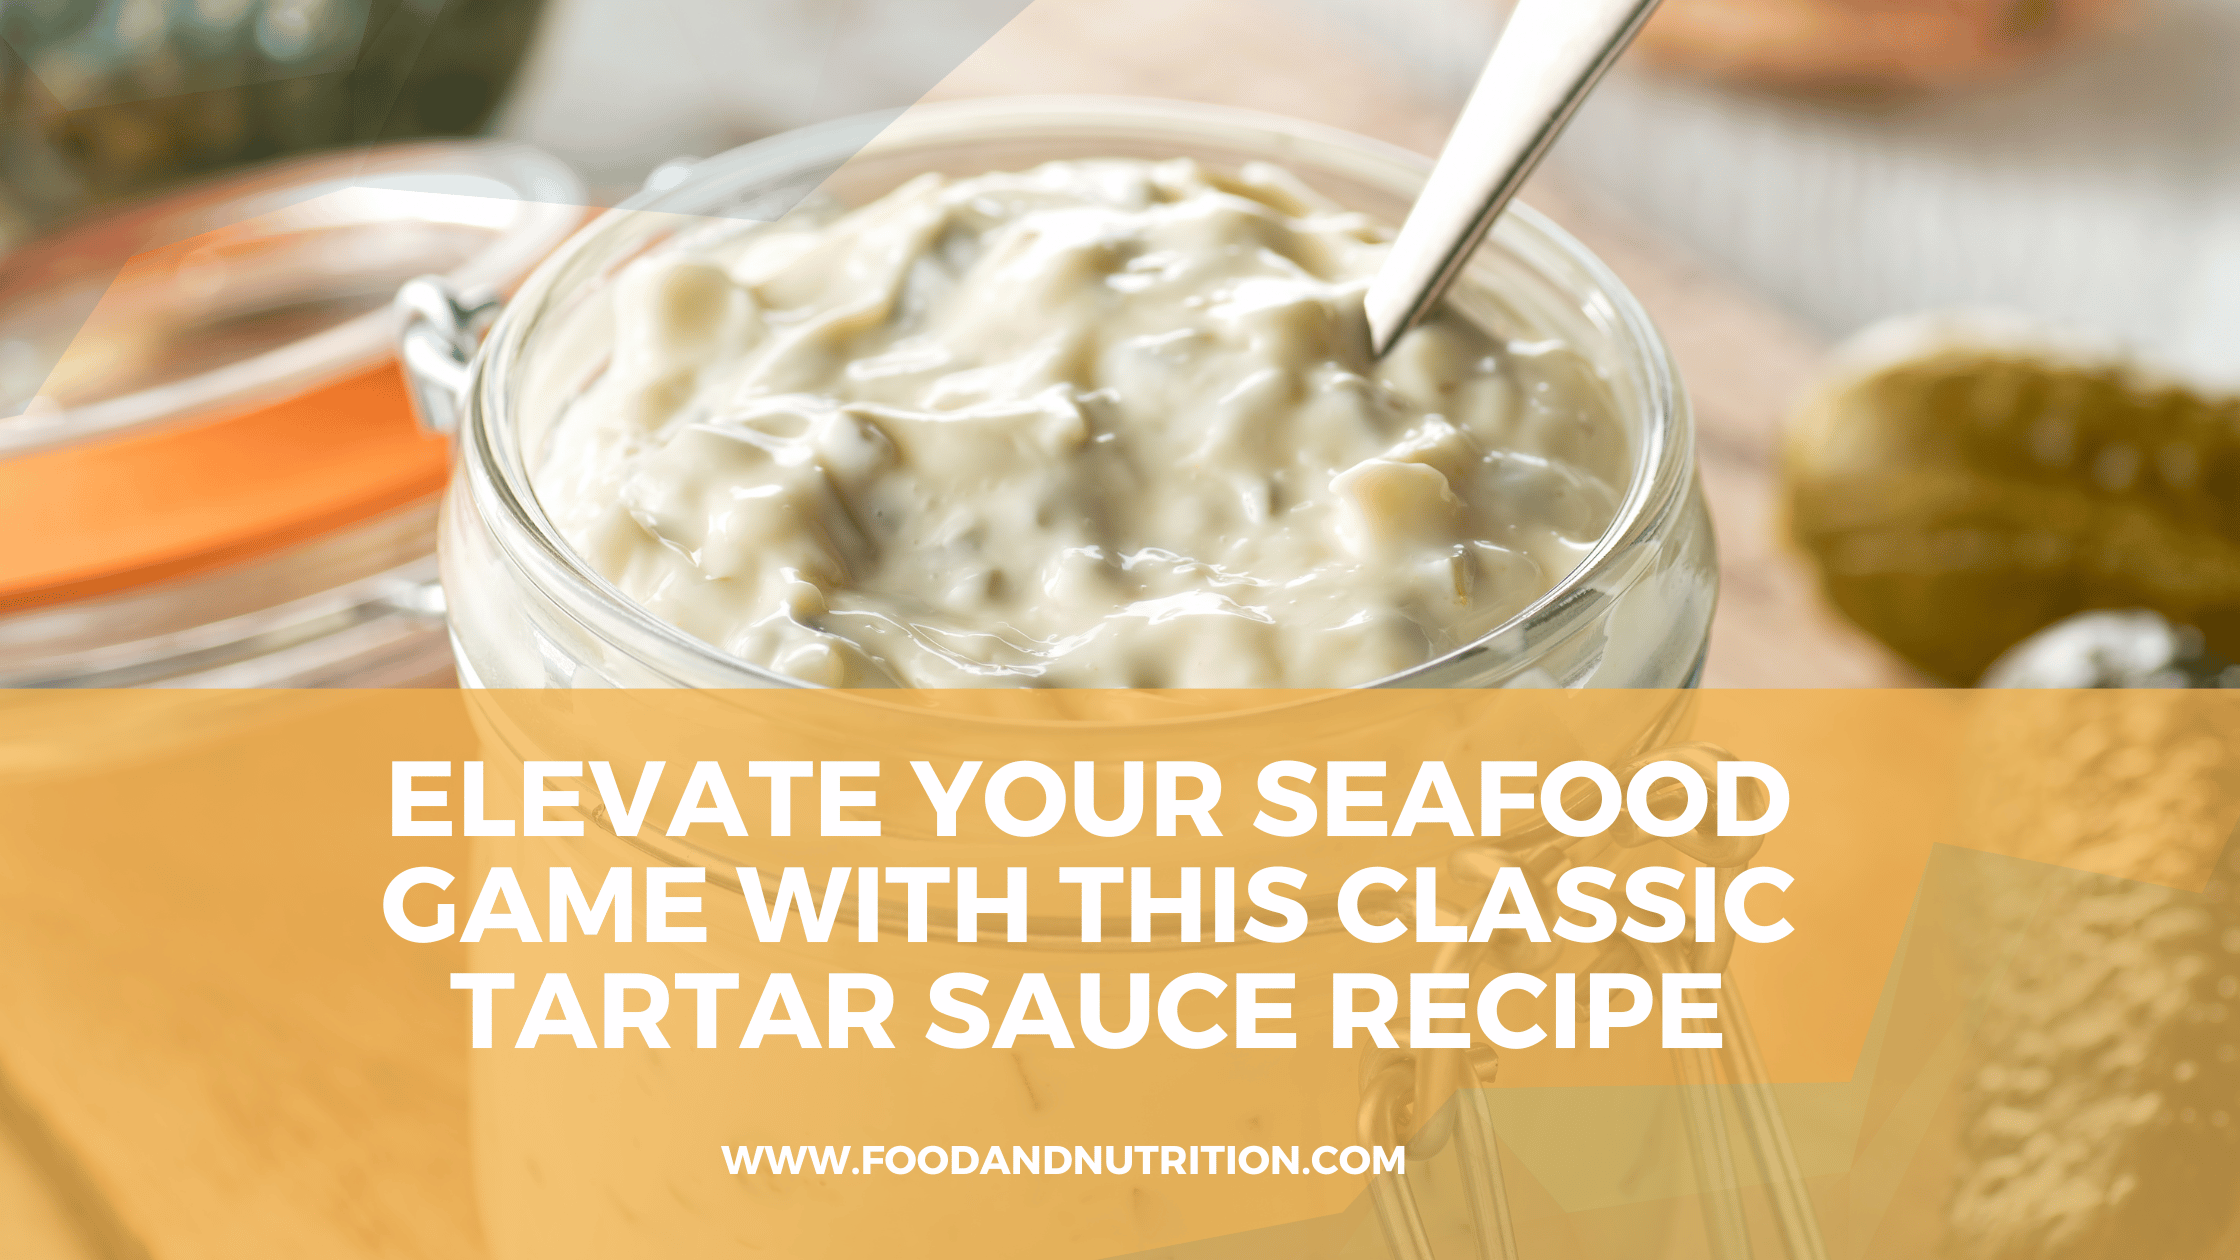 Transform Your Seafood Experience with Classic Tartar Sauce